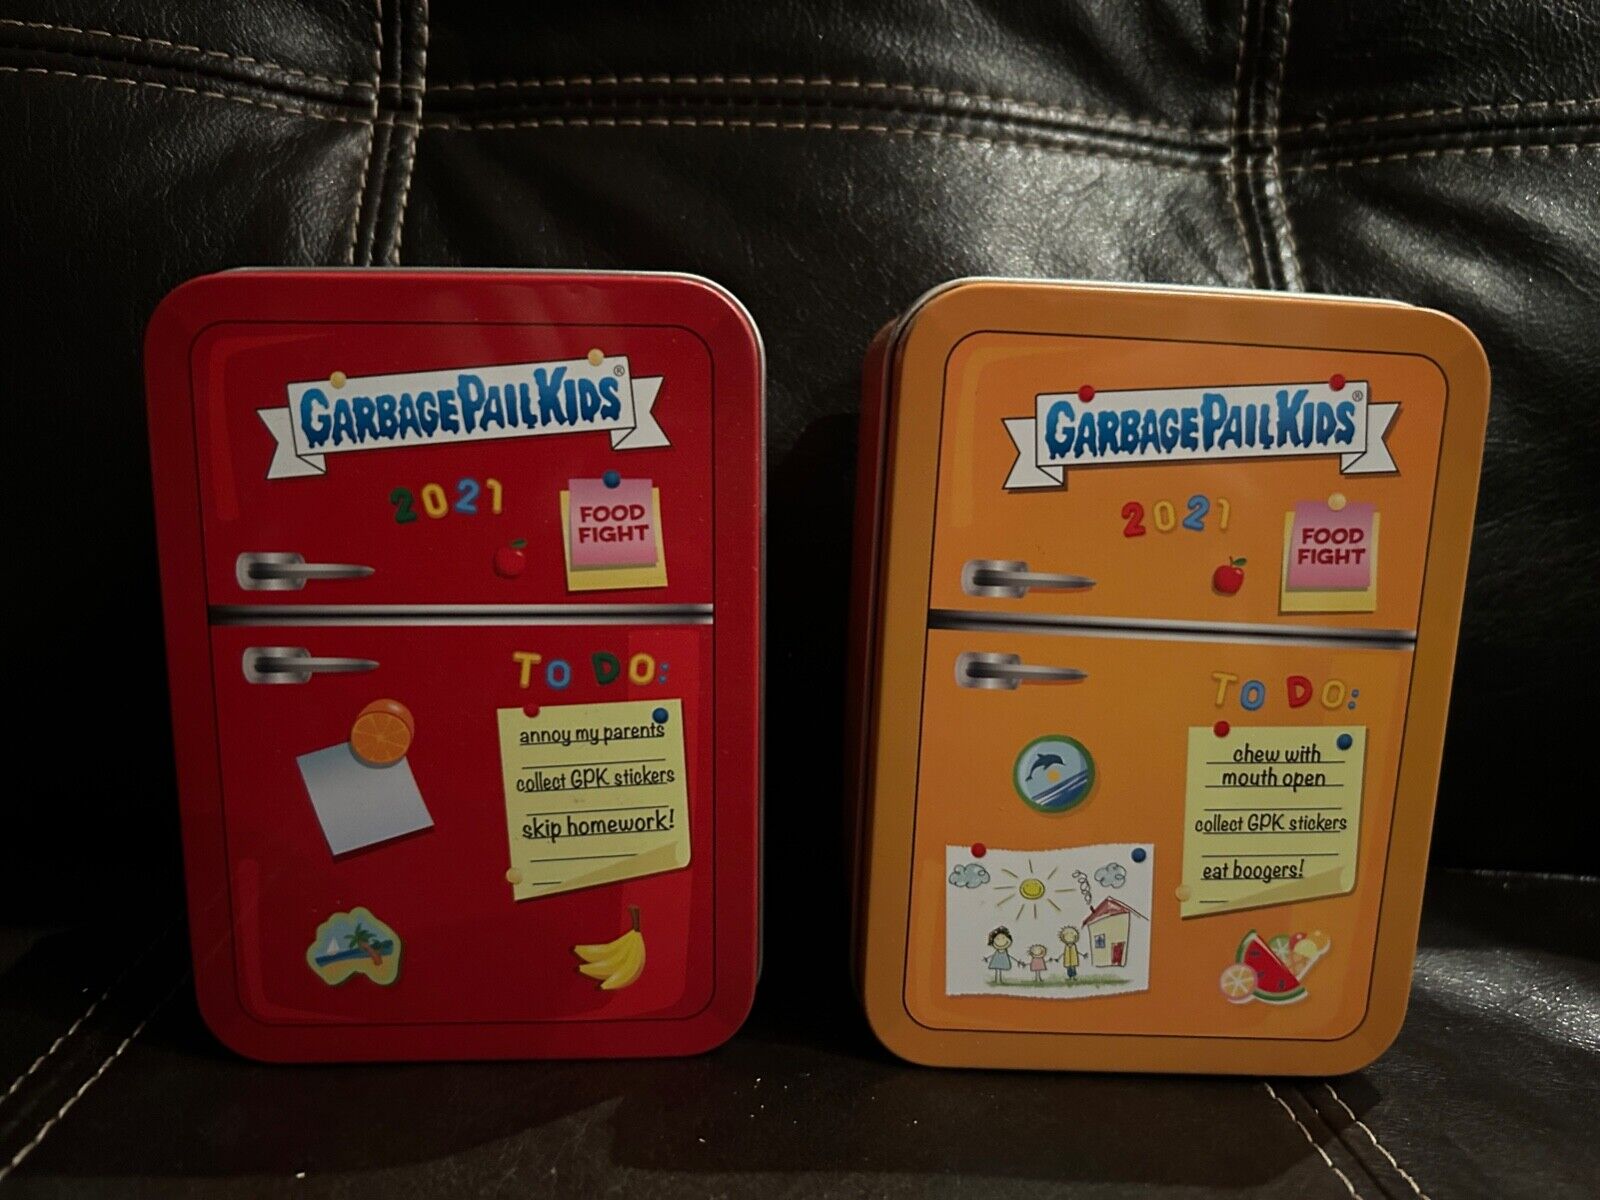 Pair of Garbage Pail Kids 2021 Food Fight Sticker Card Boxes Red and Orange